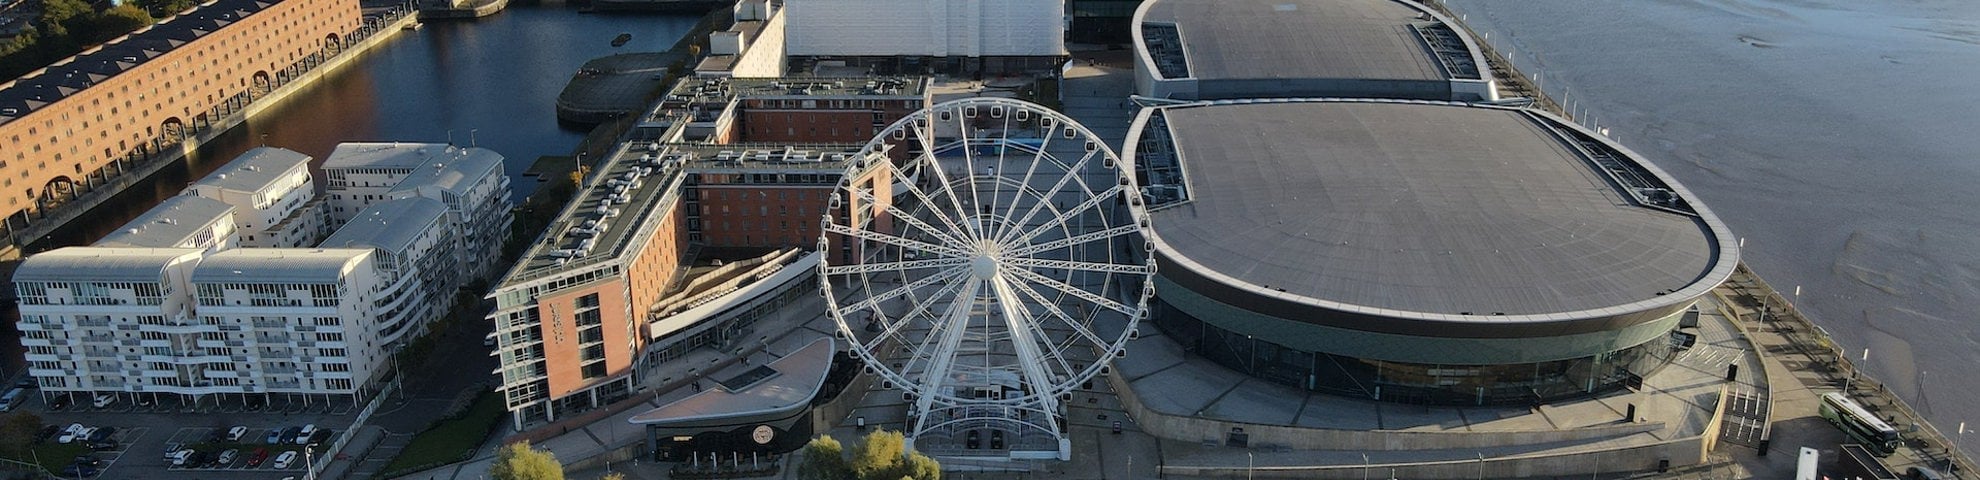 Birds eye view of the the wheel at daytime.